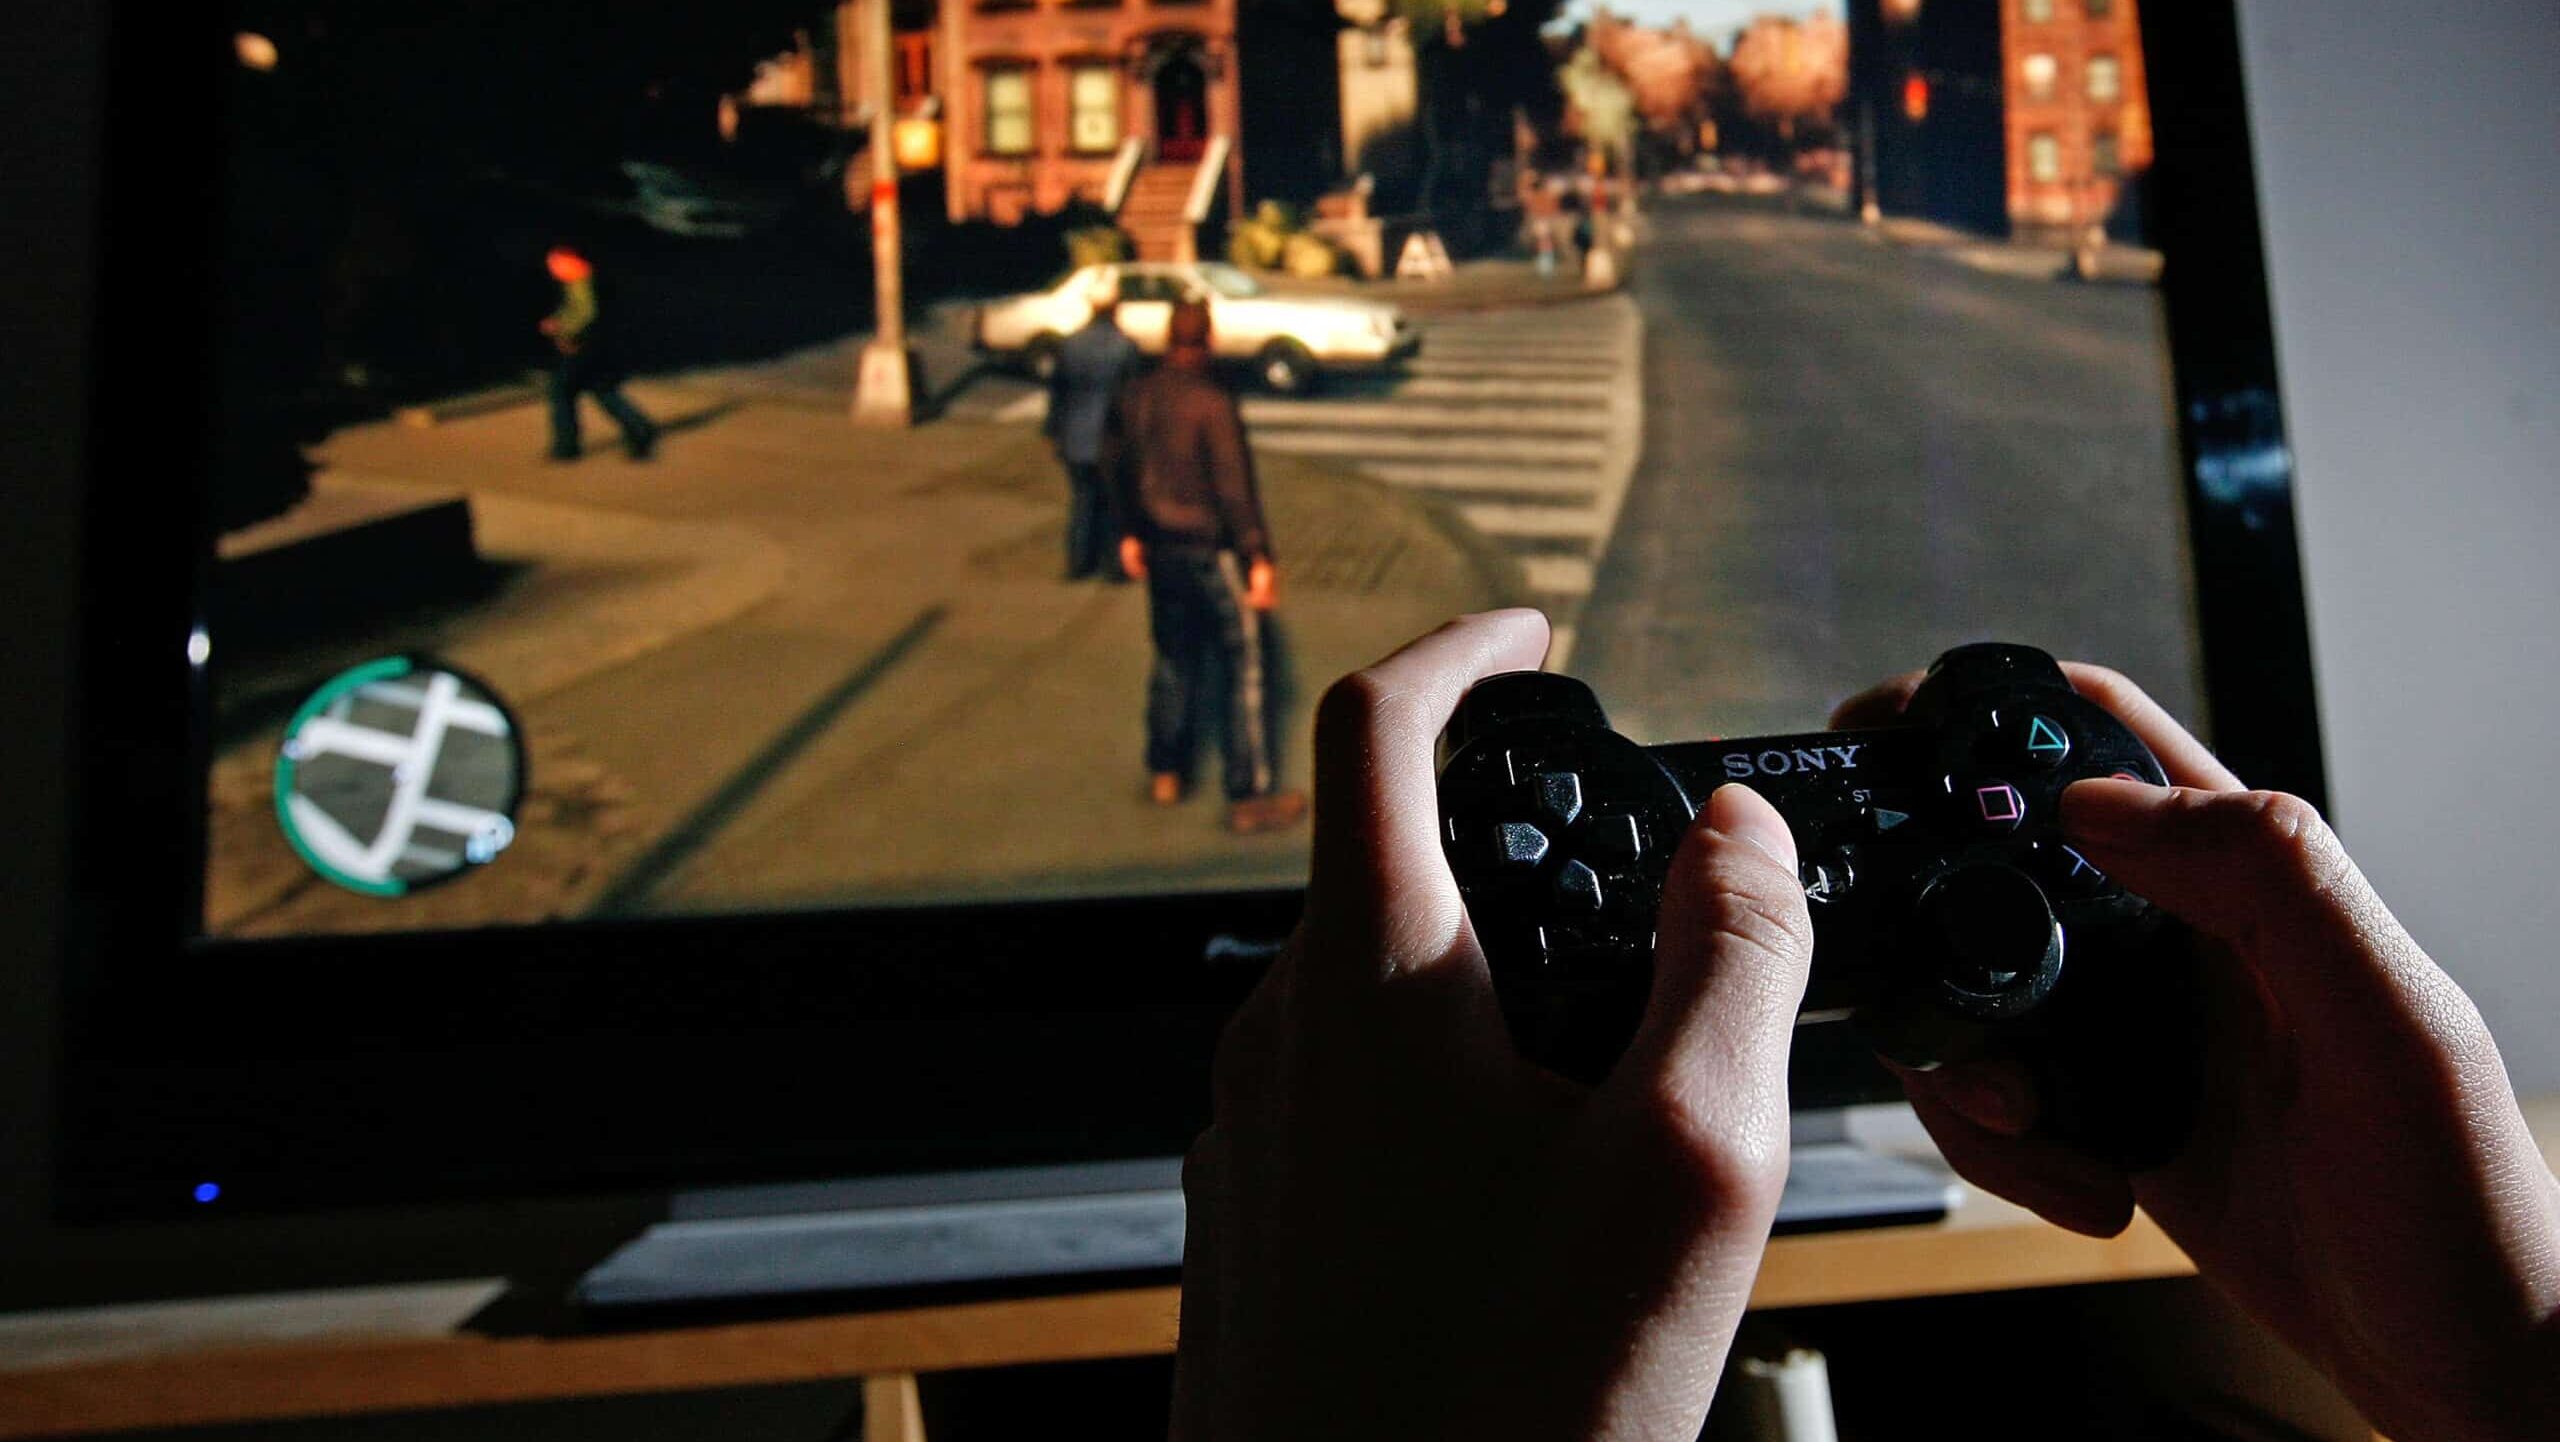 LONDON - APRIL 29: A young man plays Grand Theft Auto IV on the game's day of release on April 29, 2008 in London, England. The game designed for the Playstation 3 was in high demand and sold out in stores across London during its first day of sale.